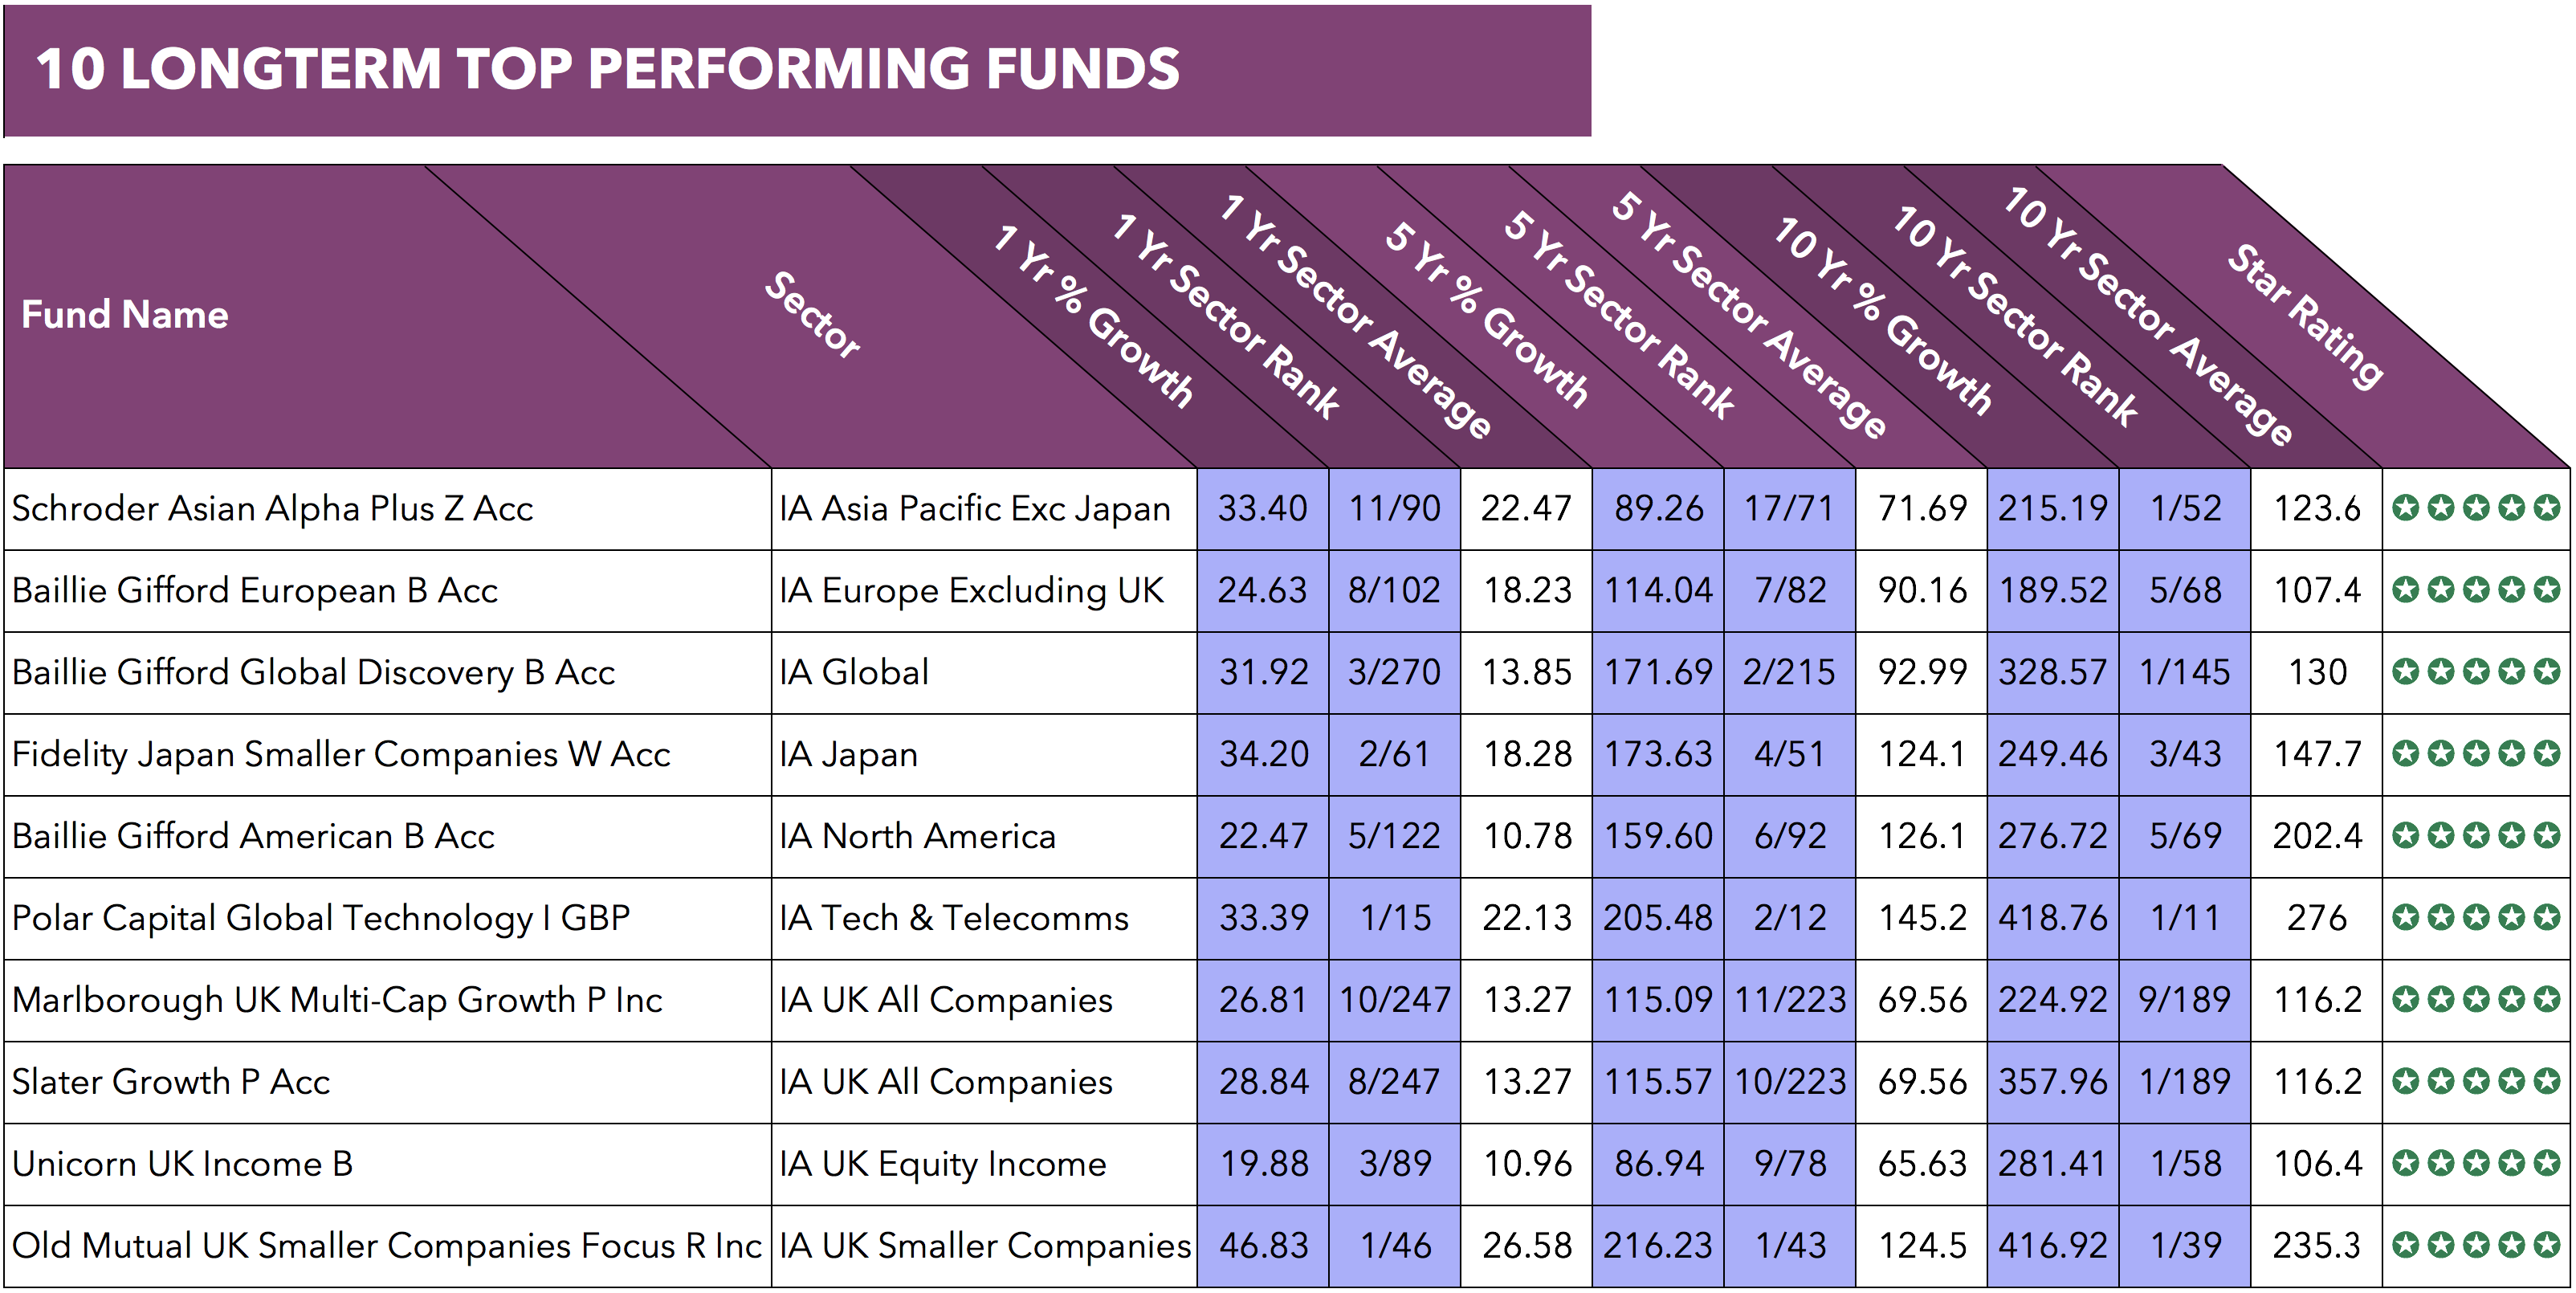 The Best Performing Funds Over 10 Years